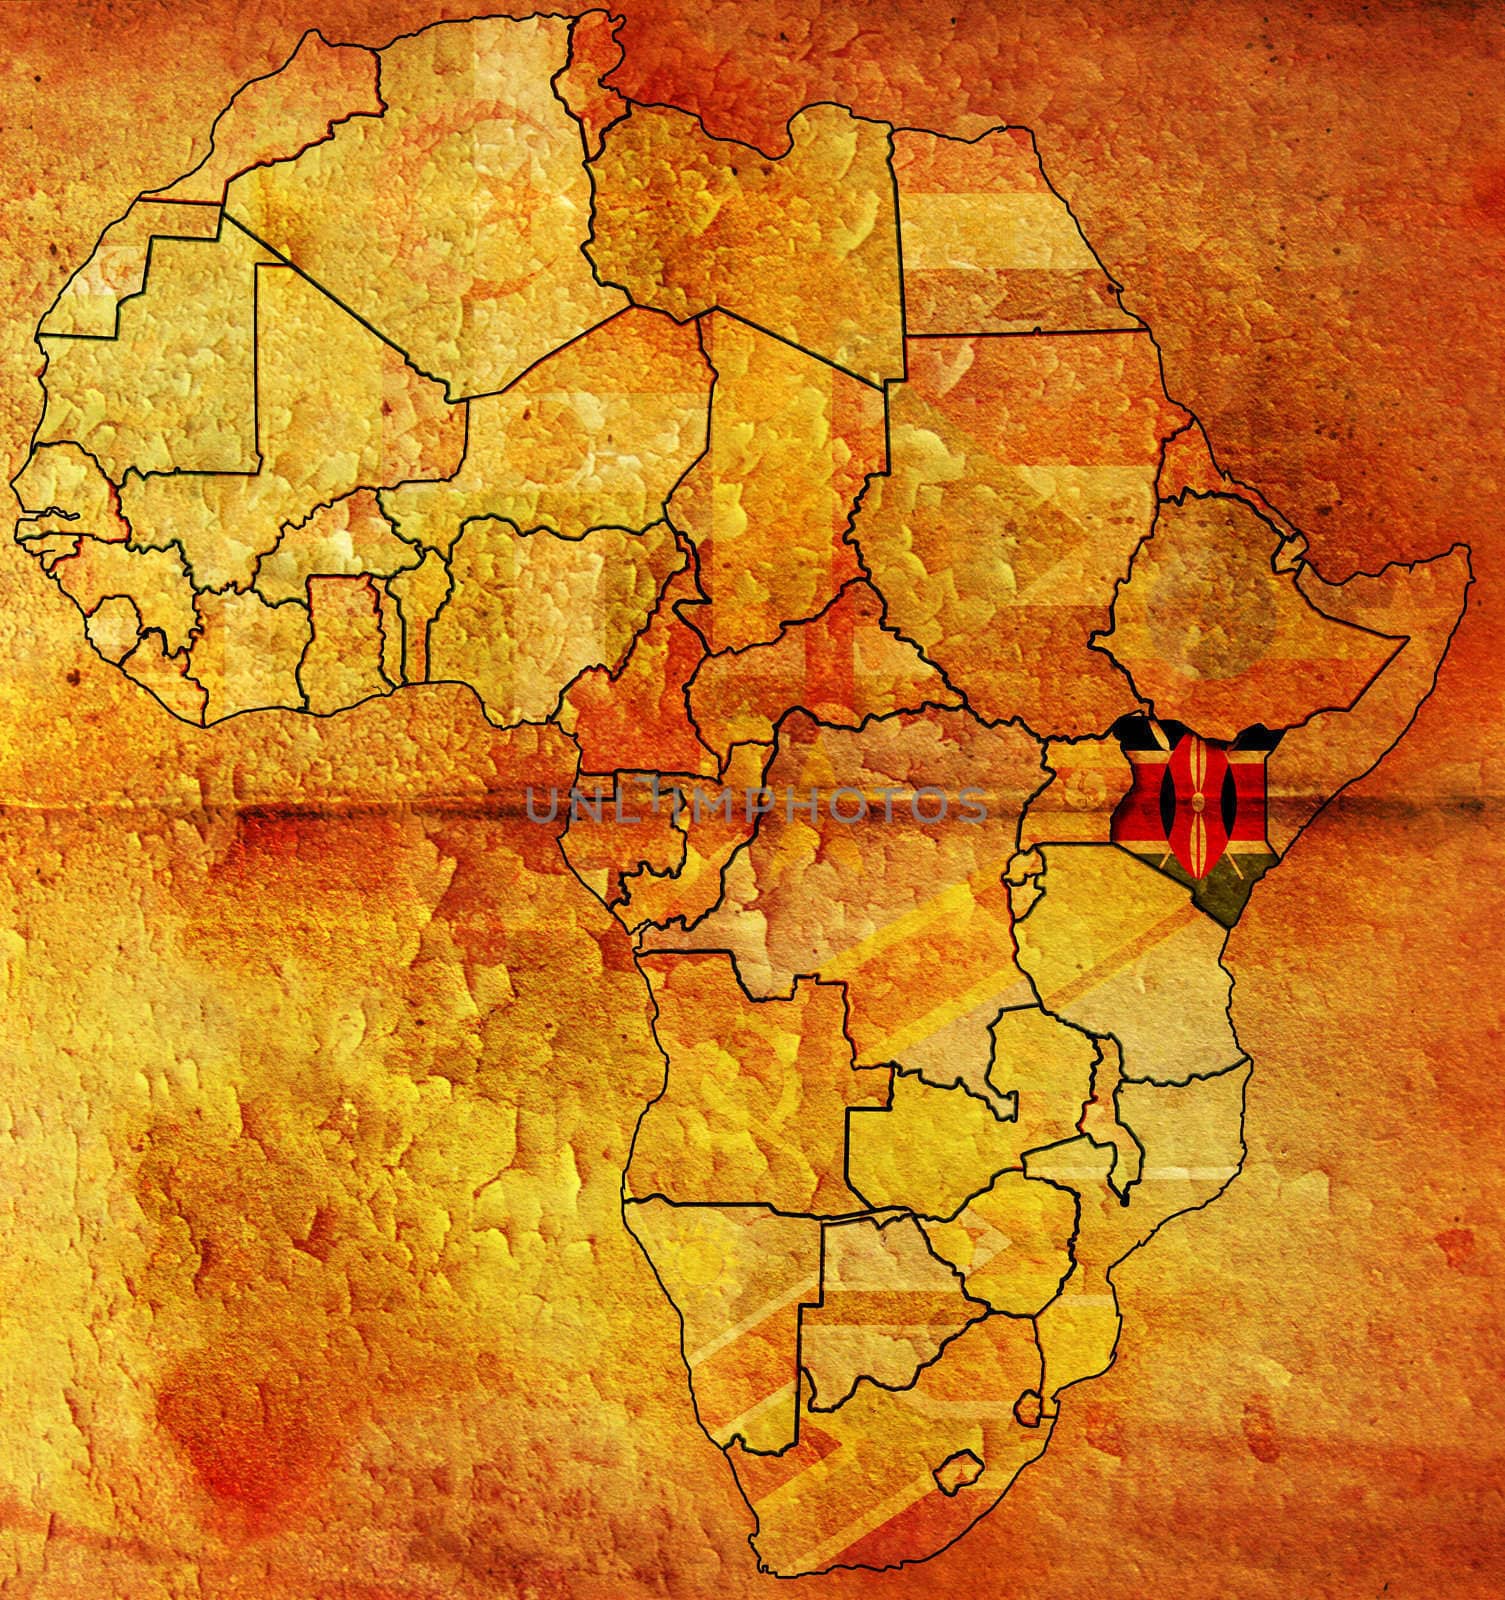 kenya on two kindes of africa map